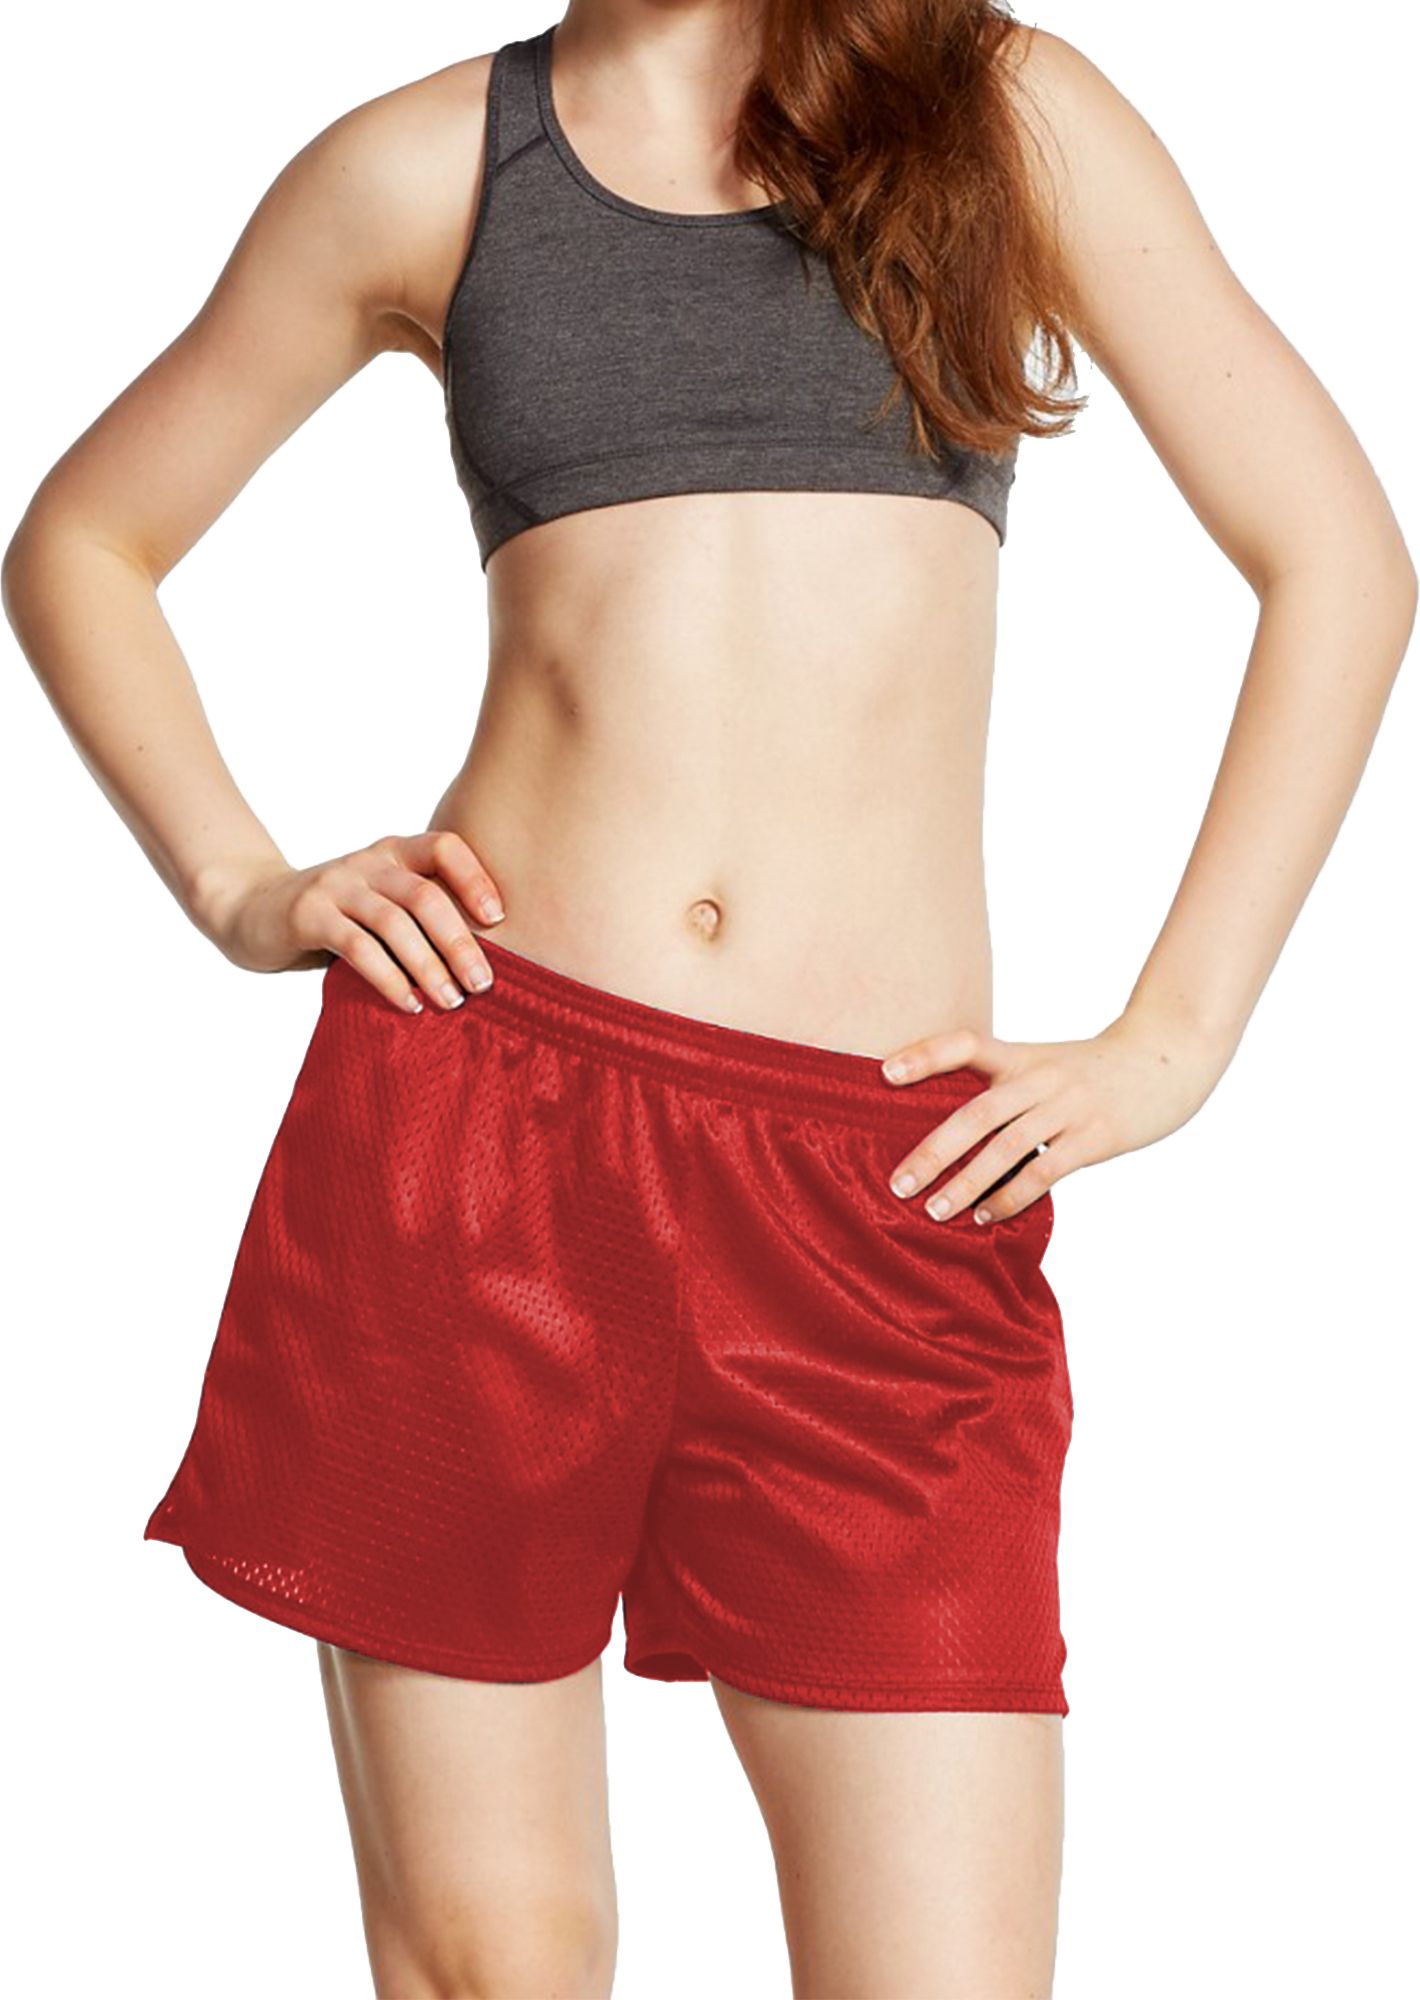 Dick's Sporting Goods Soffe Girls' New “Soffe” Shorts